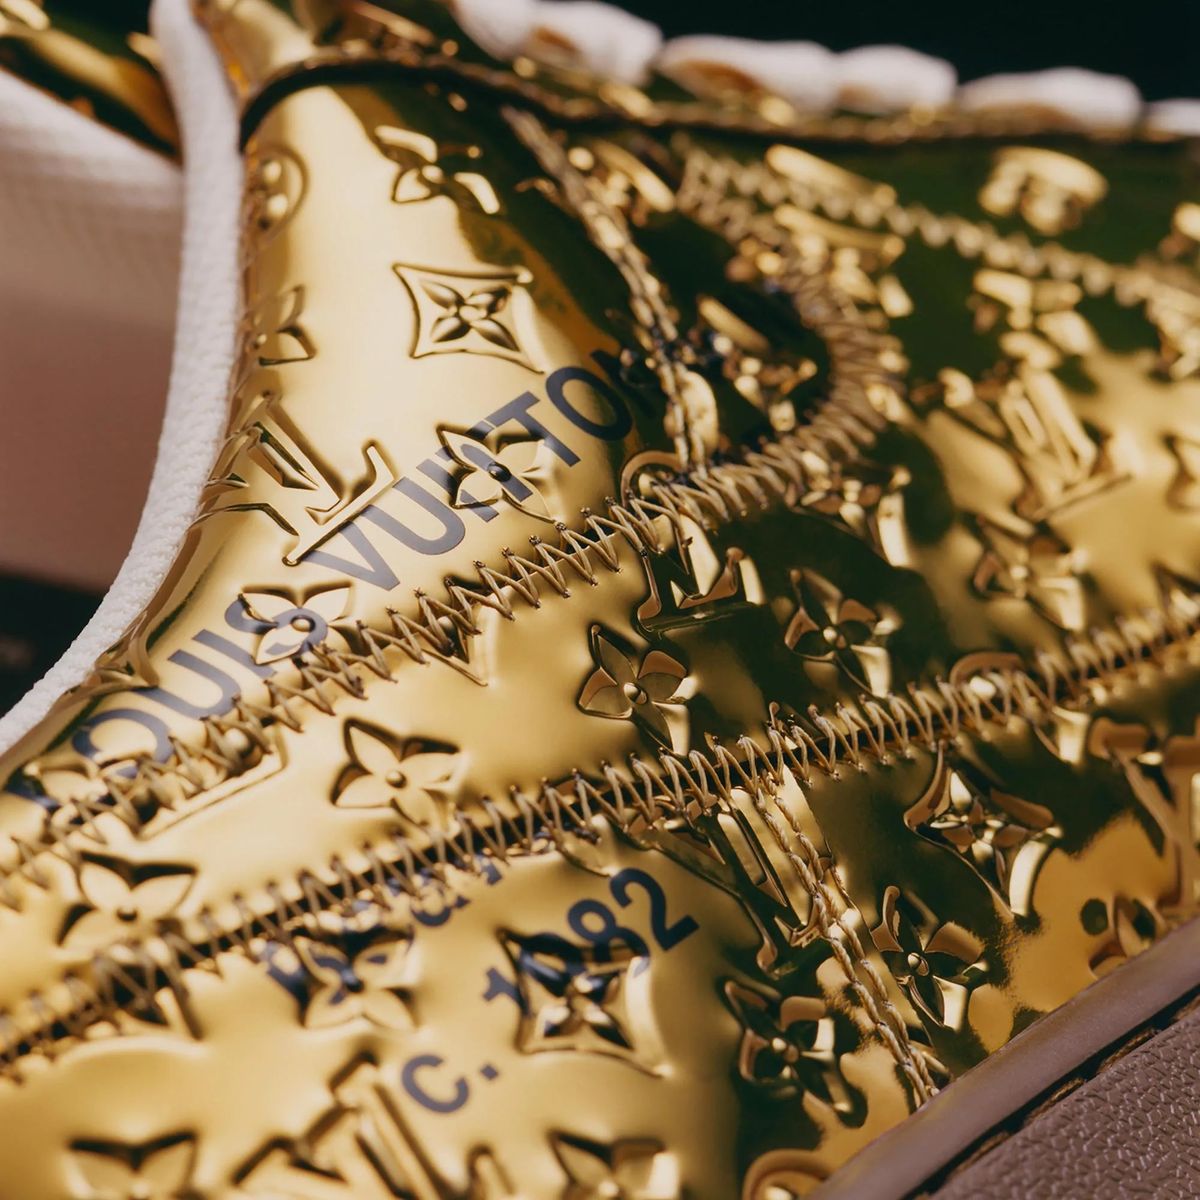 Nike's rare Louis Vuitton Air Force 1 shoes sold for as much as